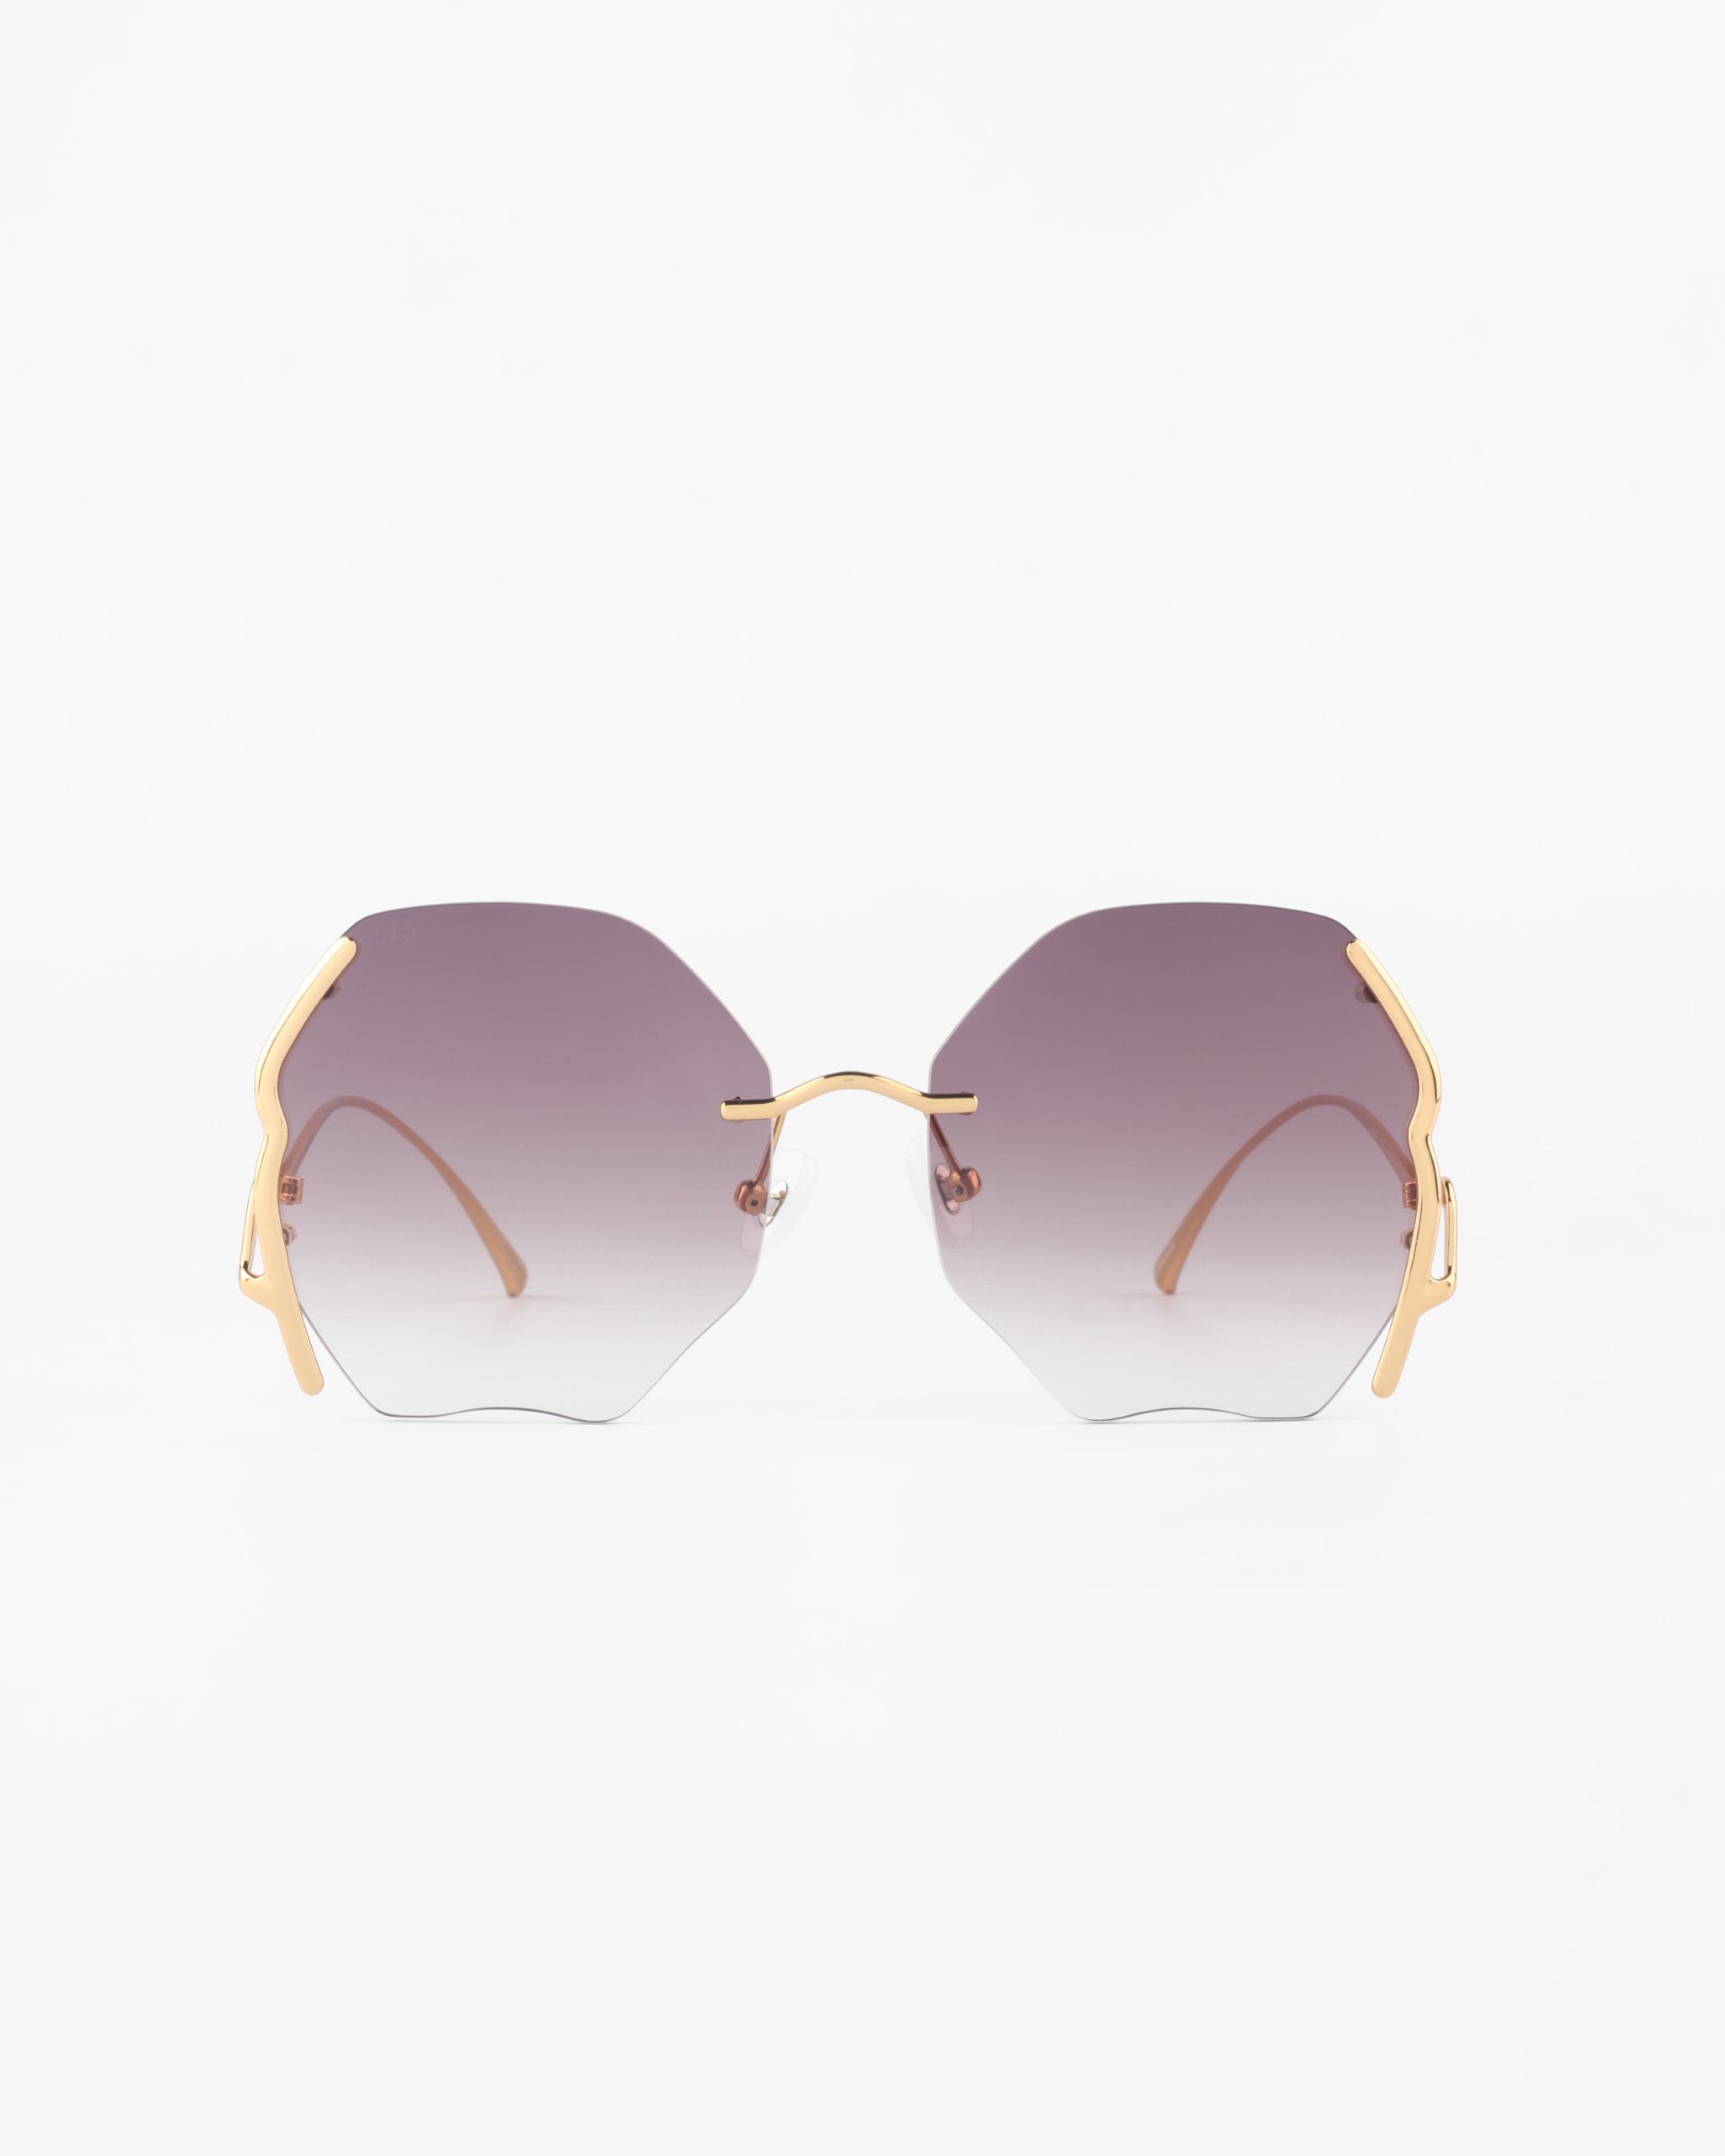 A front view of For Art&#39;s Sake® Century sunglasses with hexagonal lenses that have a gradient from dark purple to clear. The gold-plated stainless steel frames feature minimalist design with gold accents on the sides. These stylish shades offer 100% UVA &amp; UVB protection against harmful rays. The background is plain white.